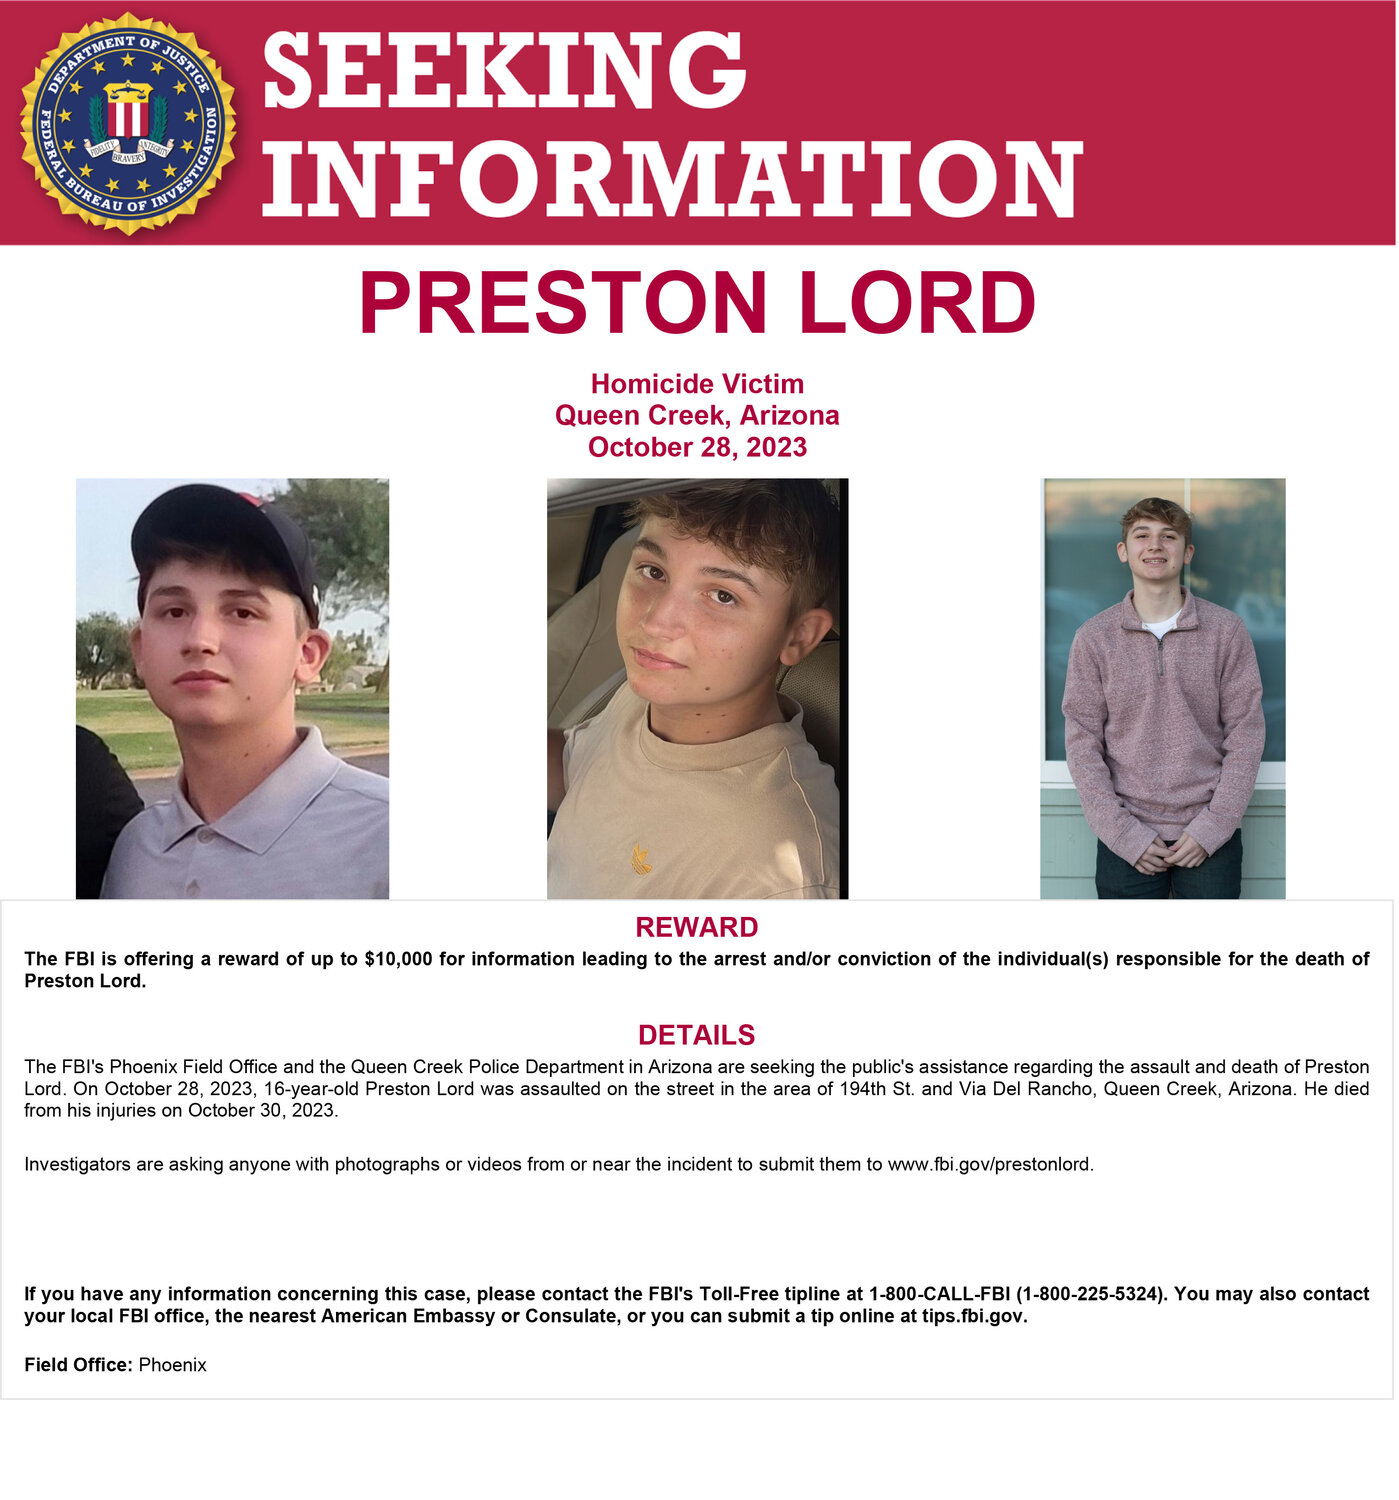 QCPD is now working with the FBI in the Preston Lord case. Photos or video evidence can be submitted to www.fbi.gov/prestonlord.The FBI's toll-Free tip line is available at 1-800-CALL-FBI (1-800-225-5324).